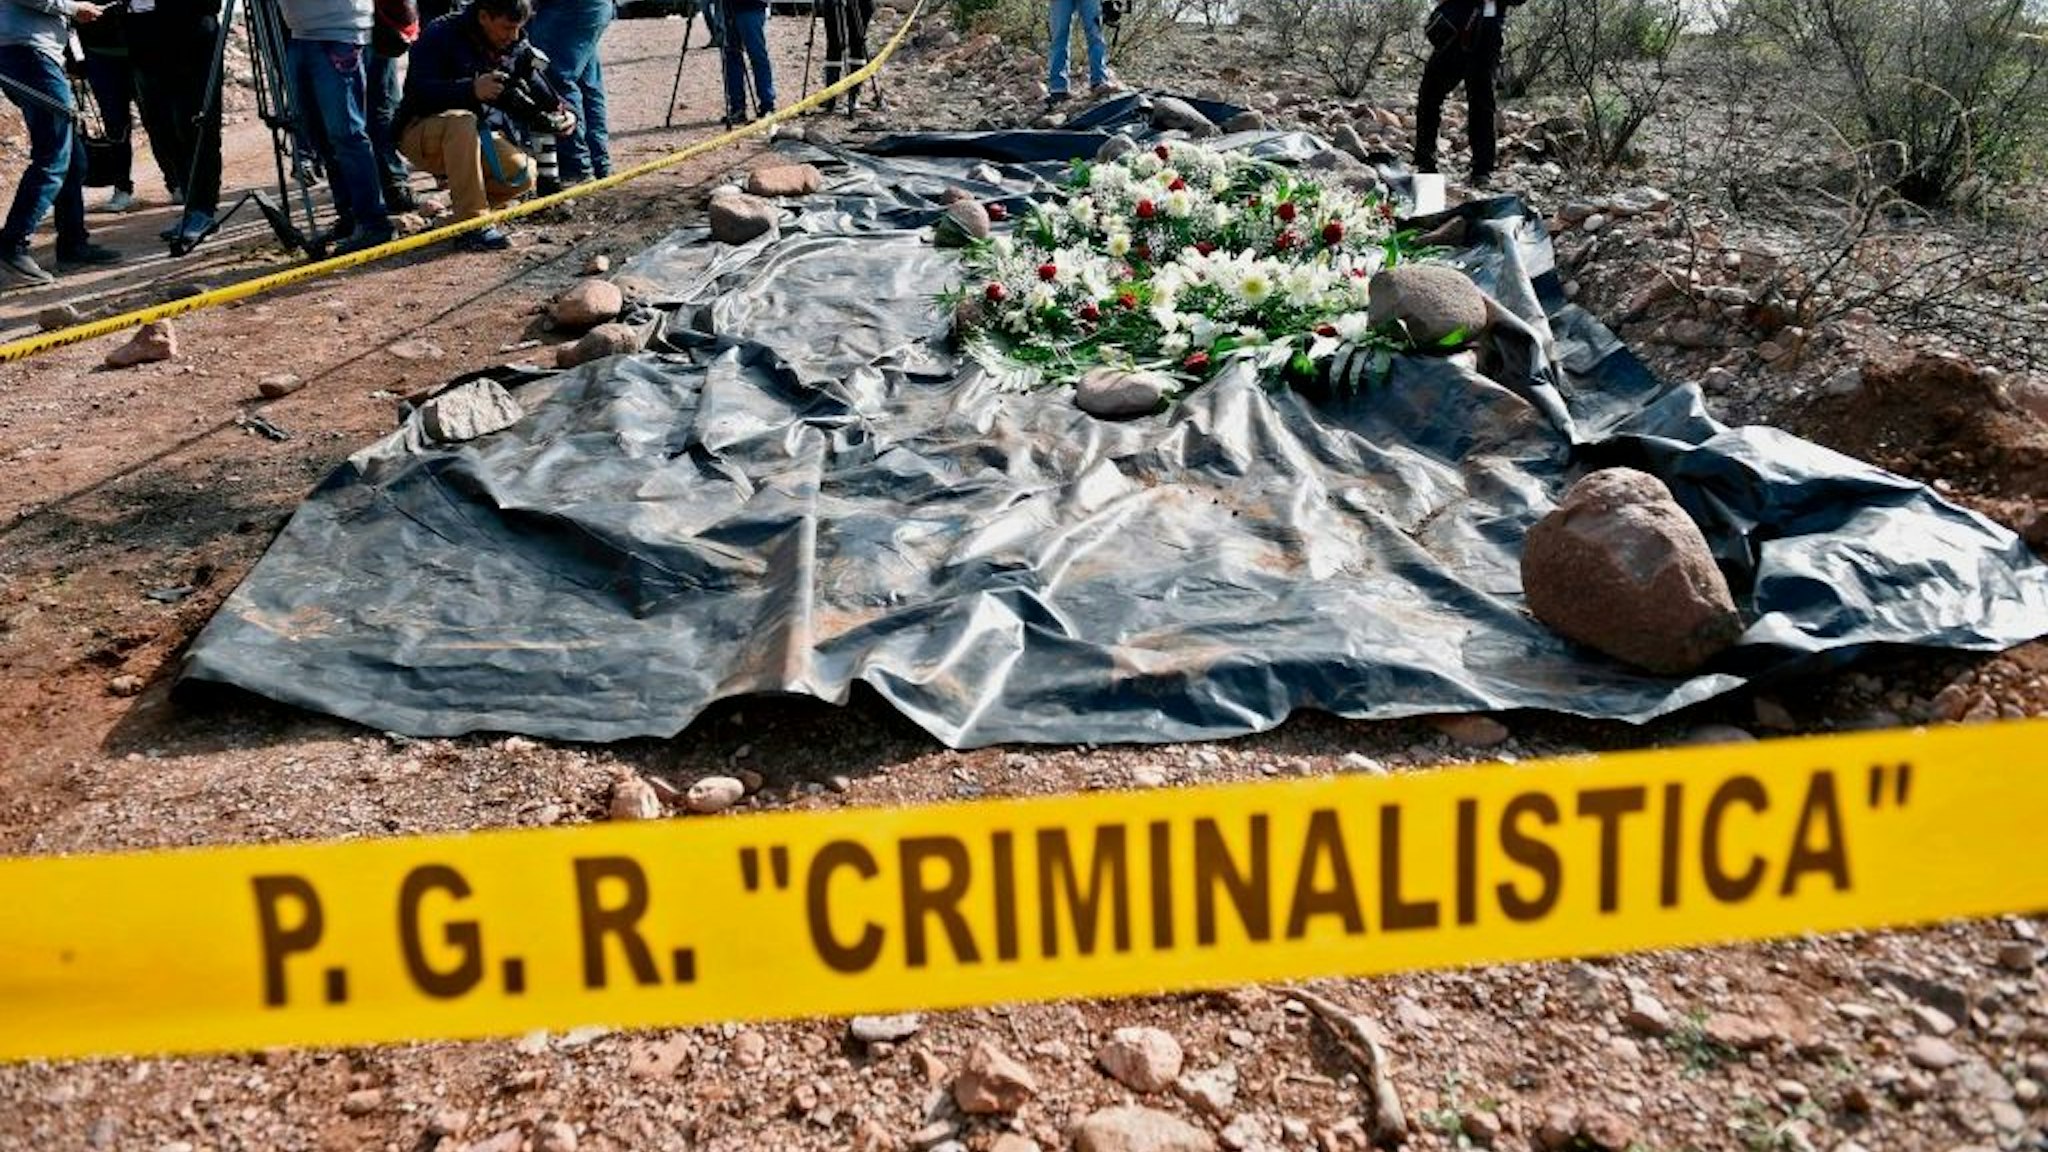 The press surrounds the site where nine Mormon women and children were murdered past November in an ambush, in Galeana, Chihuahua state, Mexico, on January 12, 2020. - Mexican President Andres Manuel Lopez Obrador is in Bavispe to meet with relatives of the nine Mormon victims of the November 4 attack, which happened on an isolated dirt road in a region known for turf wars between drug cartels fighting over lucrative trafficking routes to the United States. (Photo by ALFREDO ESTRELLA / AFP)